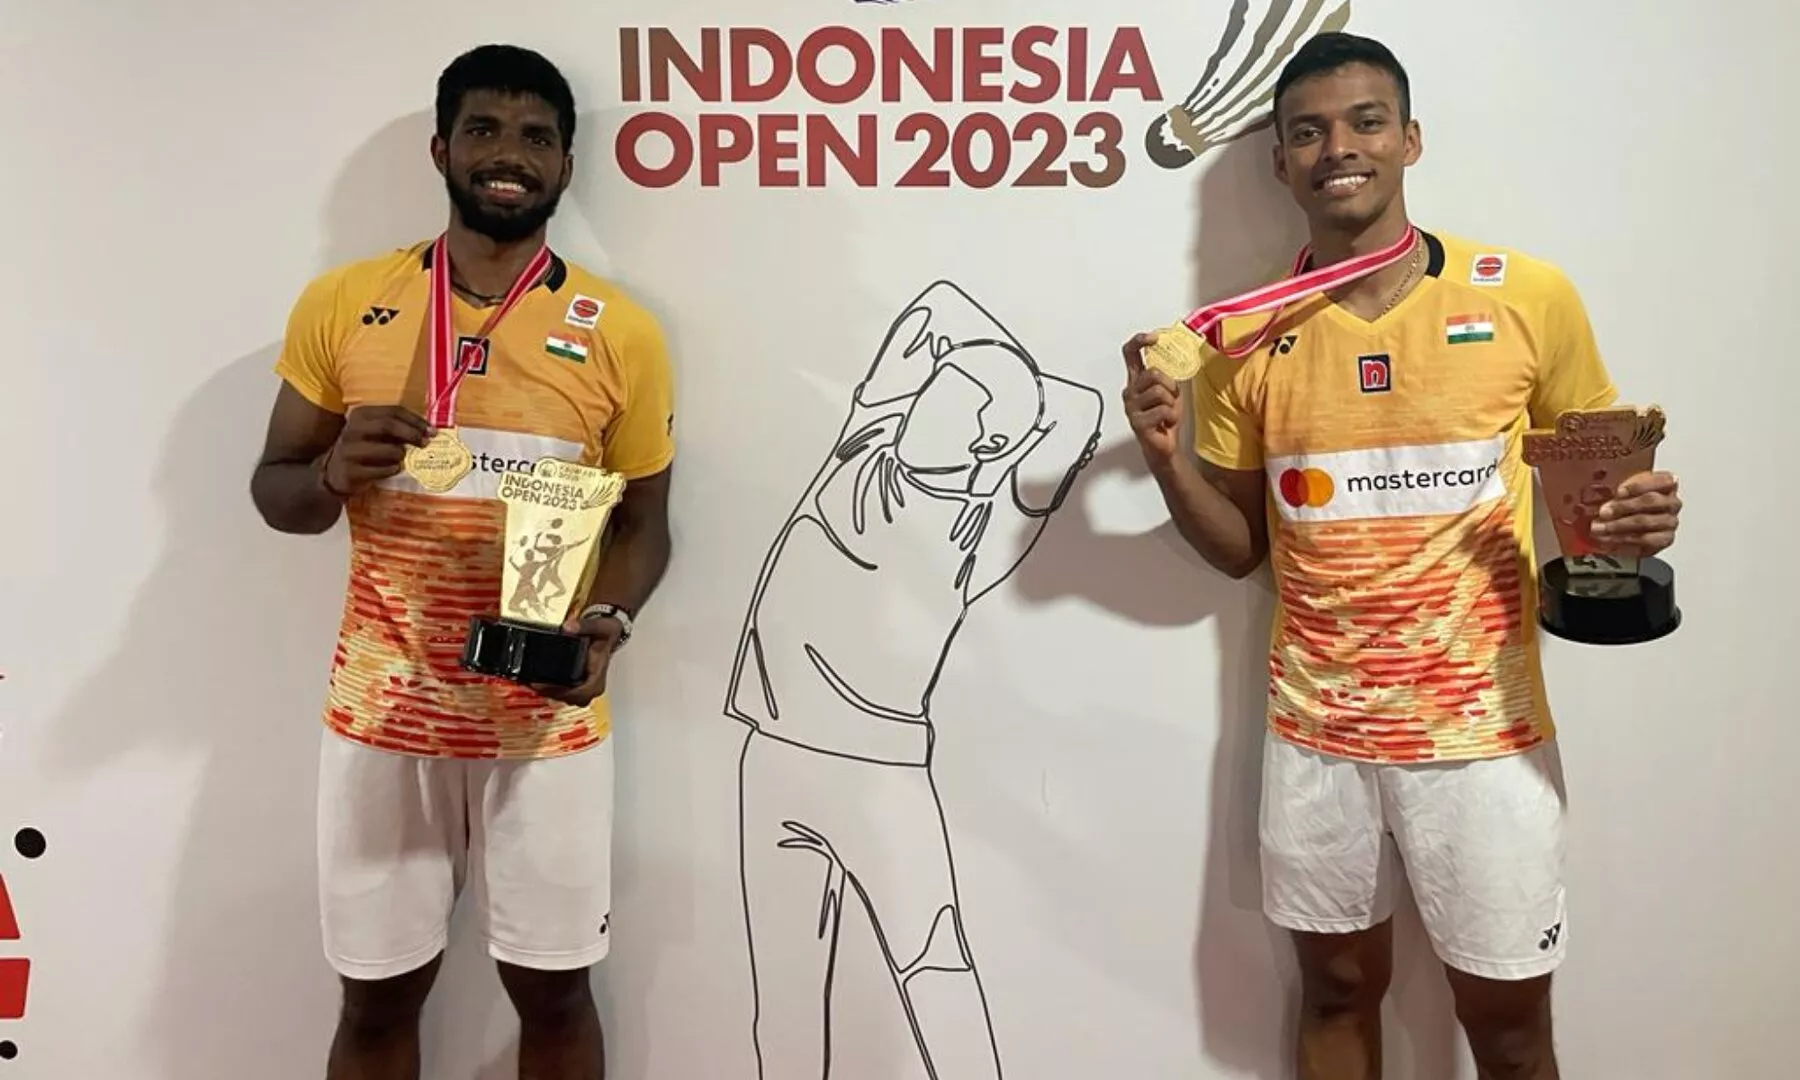 Players to win complete set of BWF World Tour Series